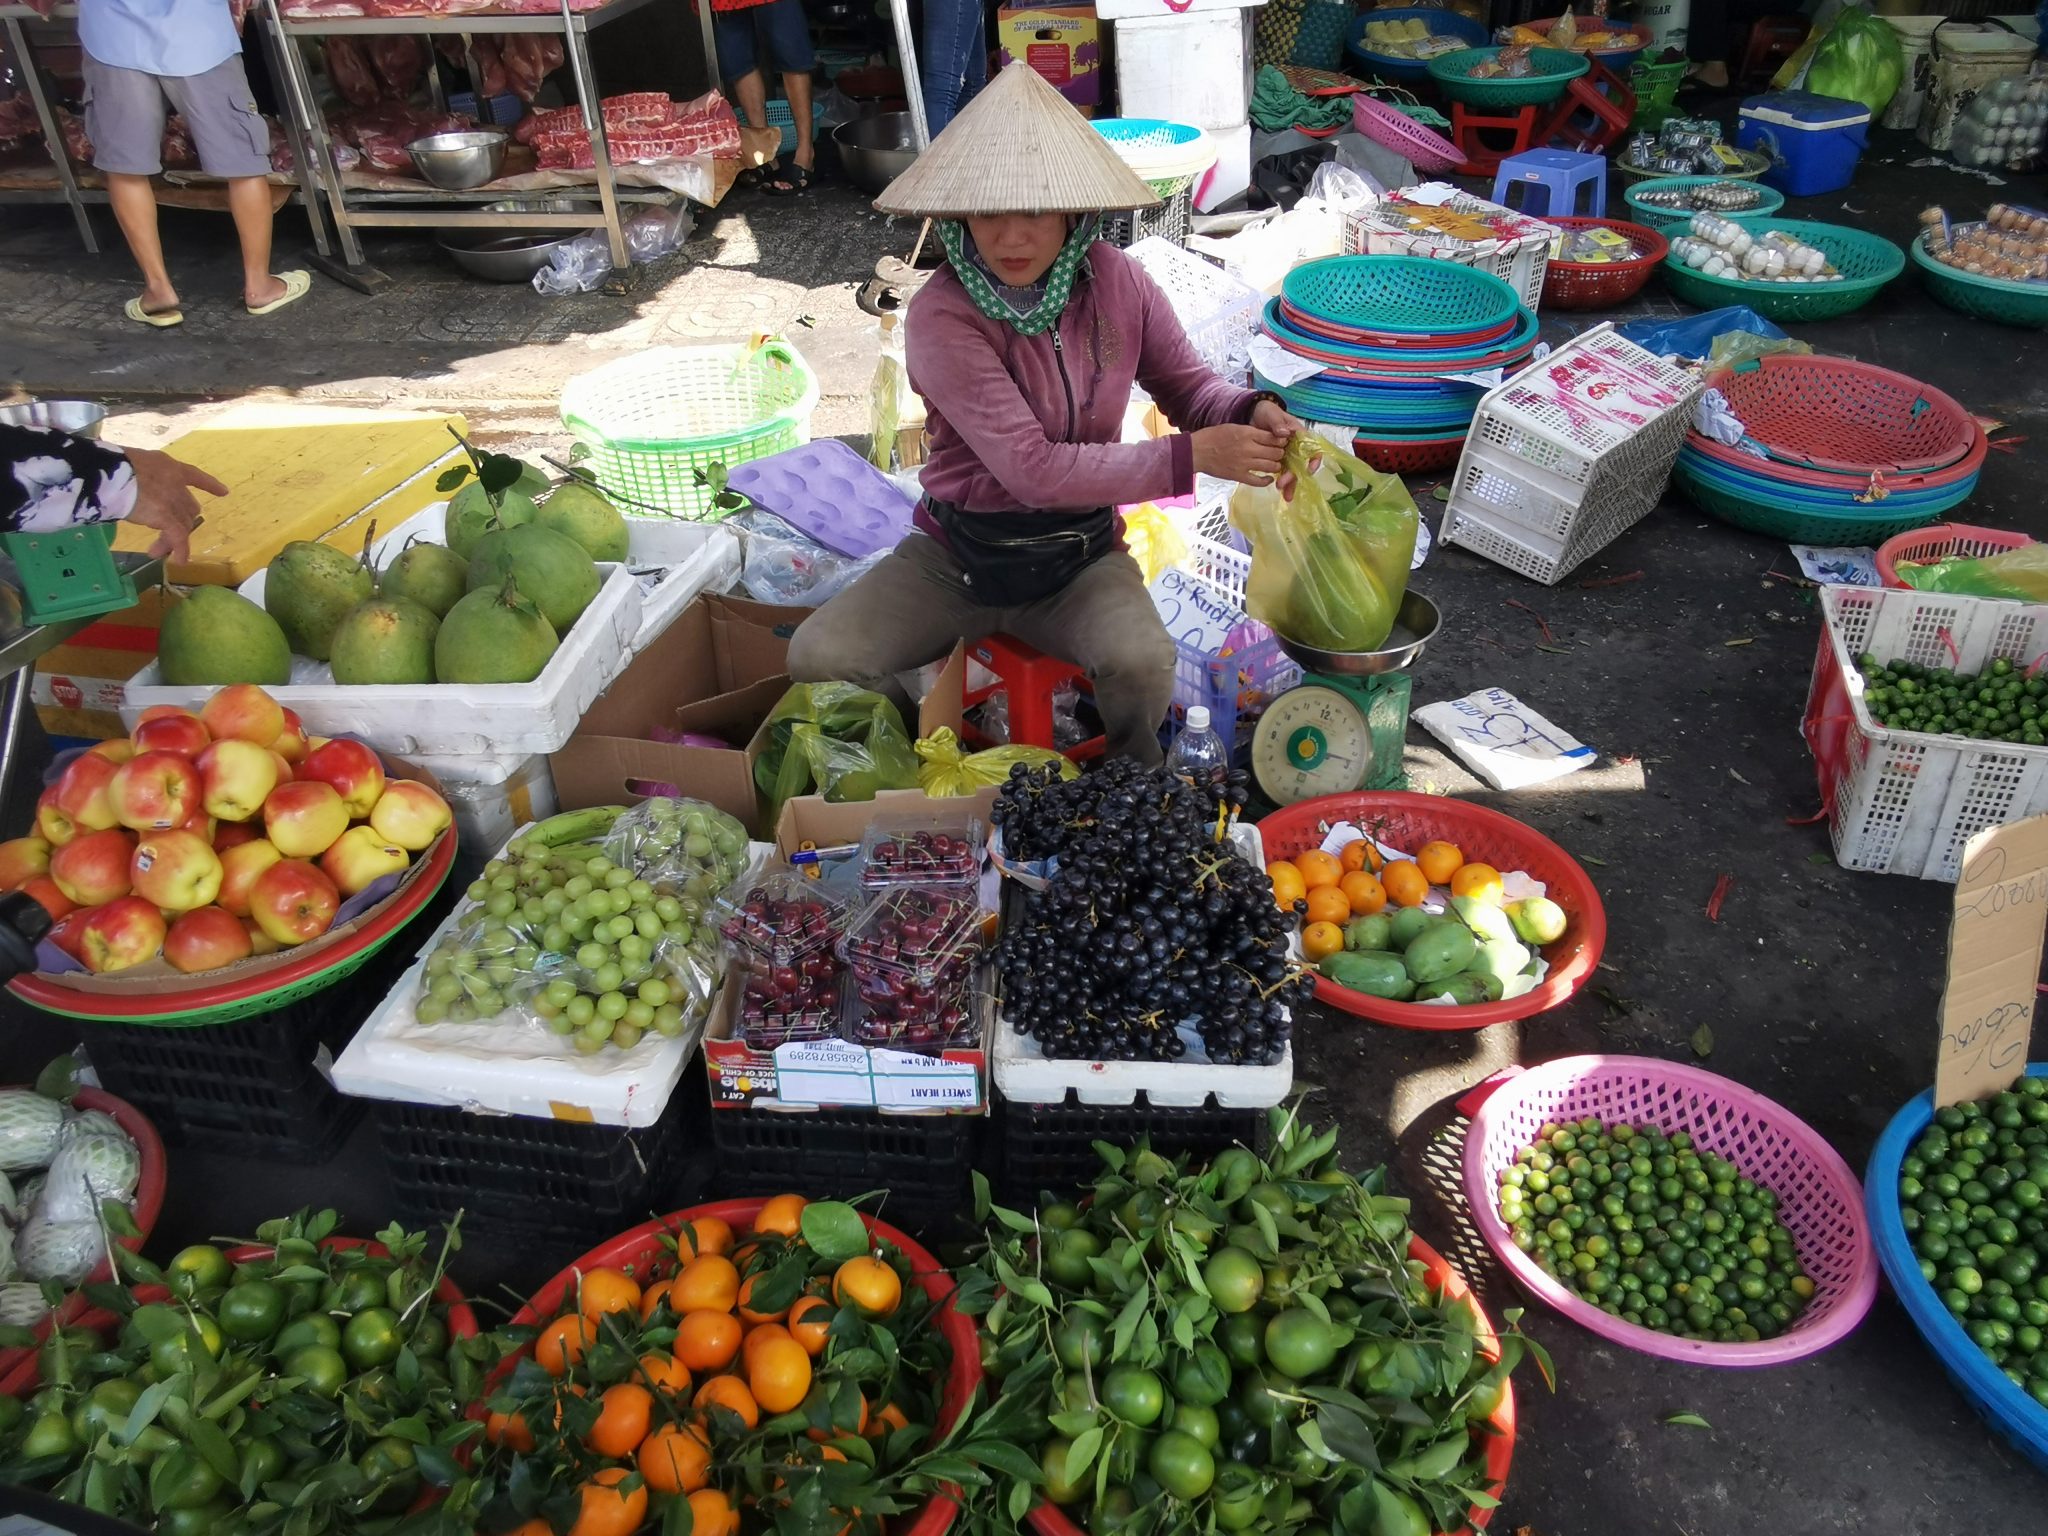 In search of greener pastures for sustainable growth in Vietnam